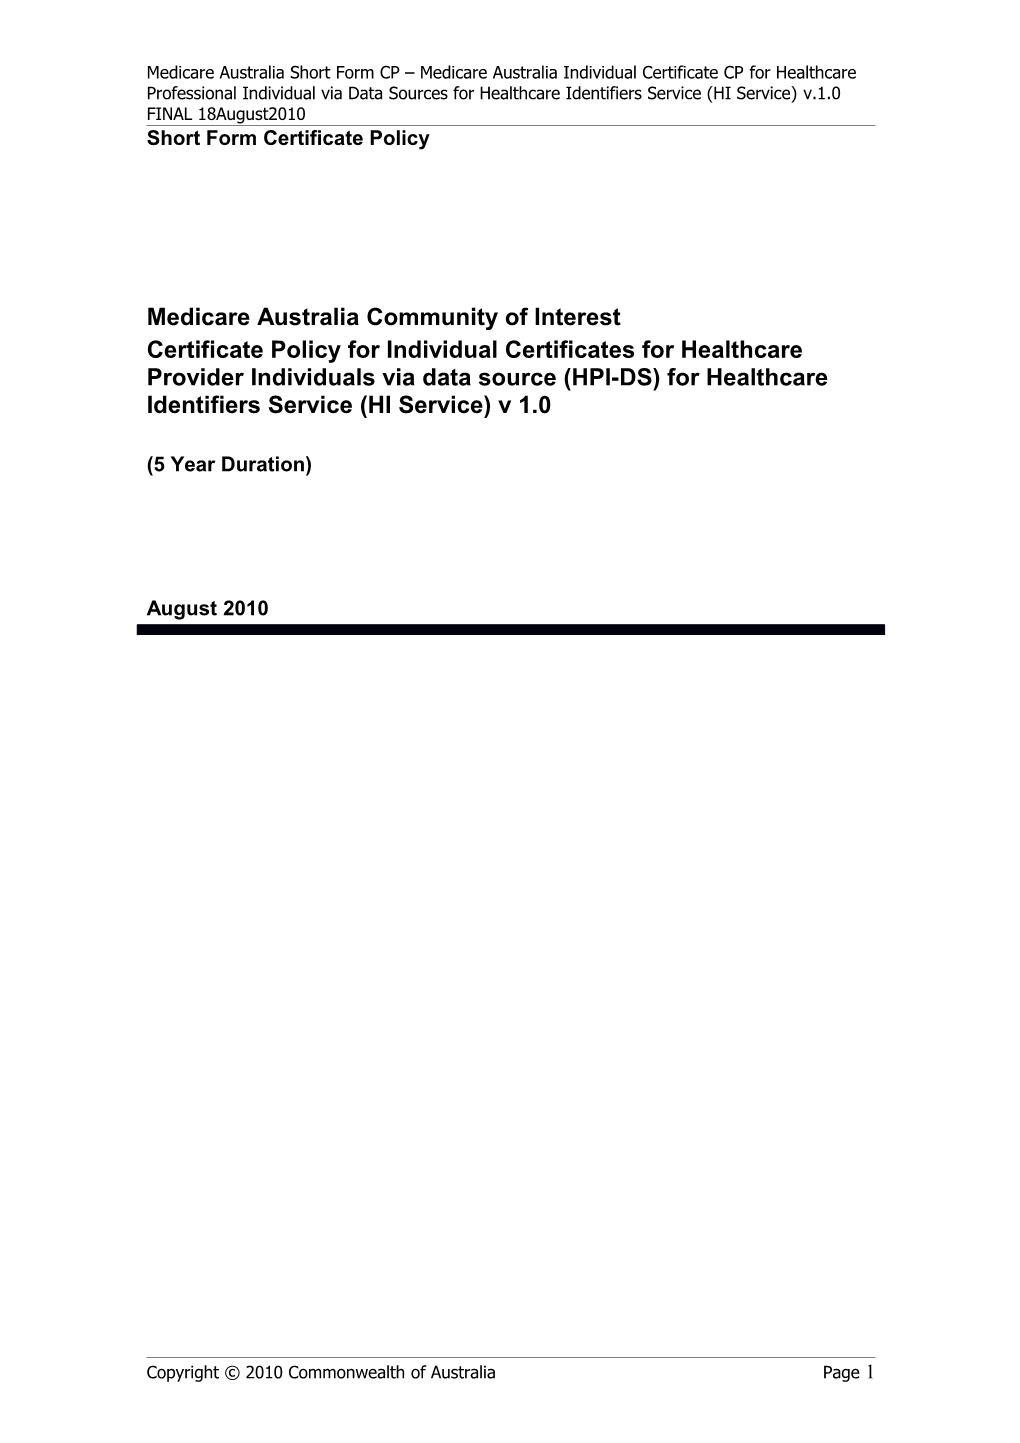 Medicare Australia Community of Interest Certificate Policy for Individual Certificates